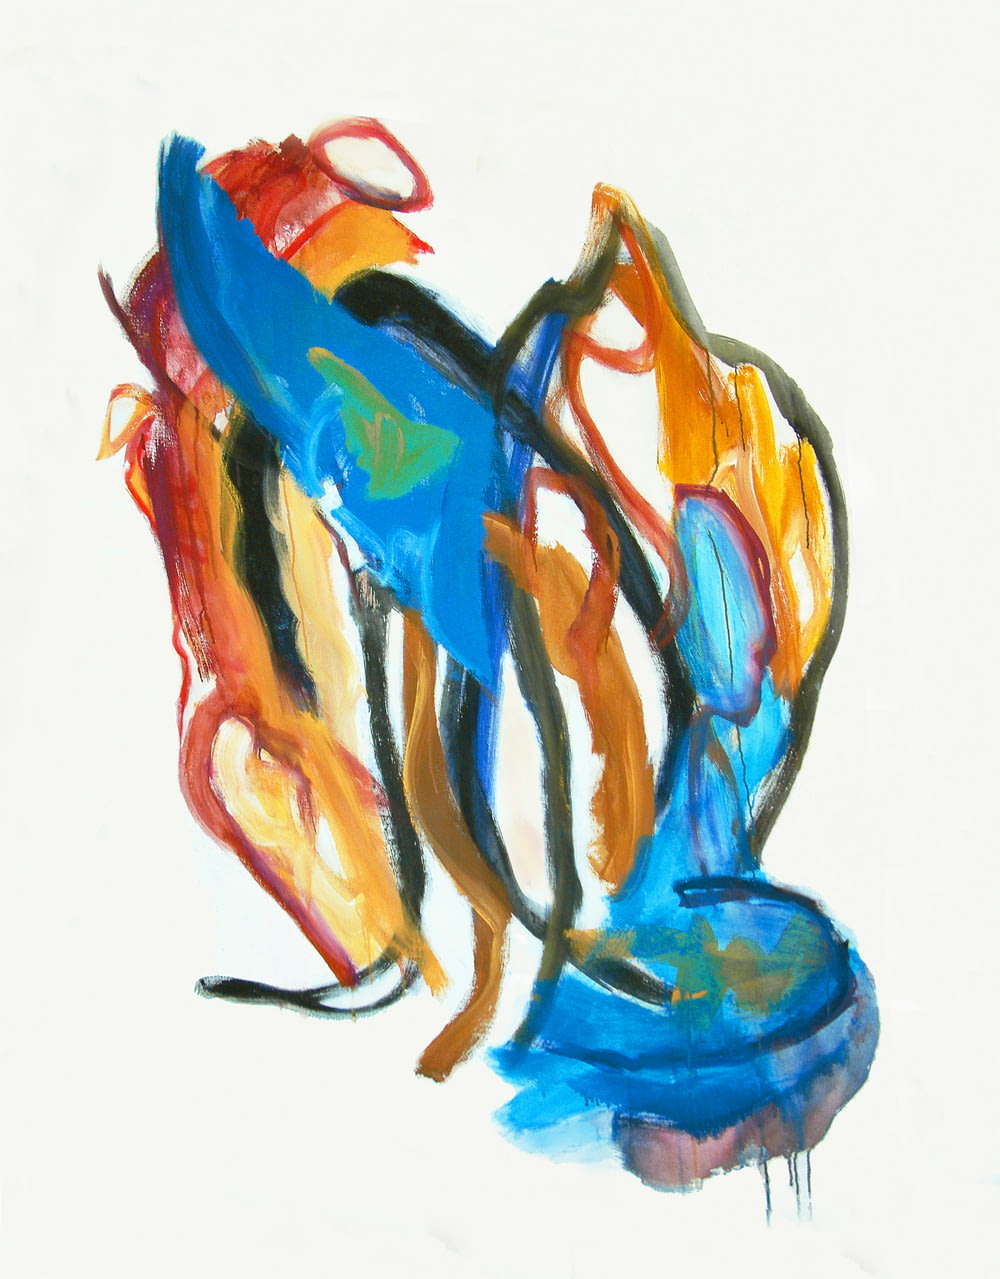 a painting of a blue vase with orange, yellow, and red colors